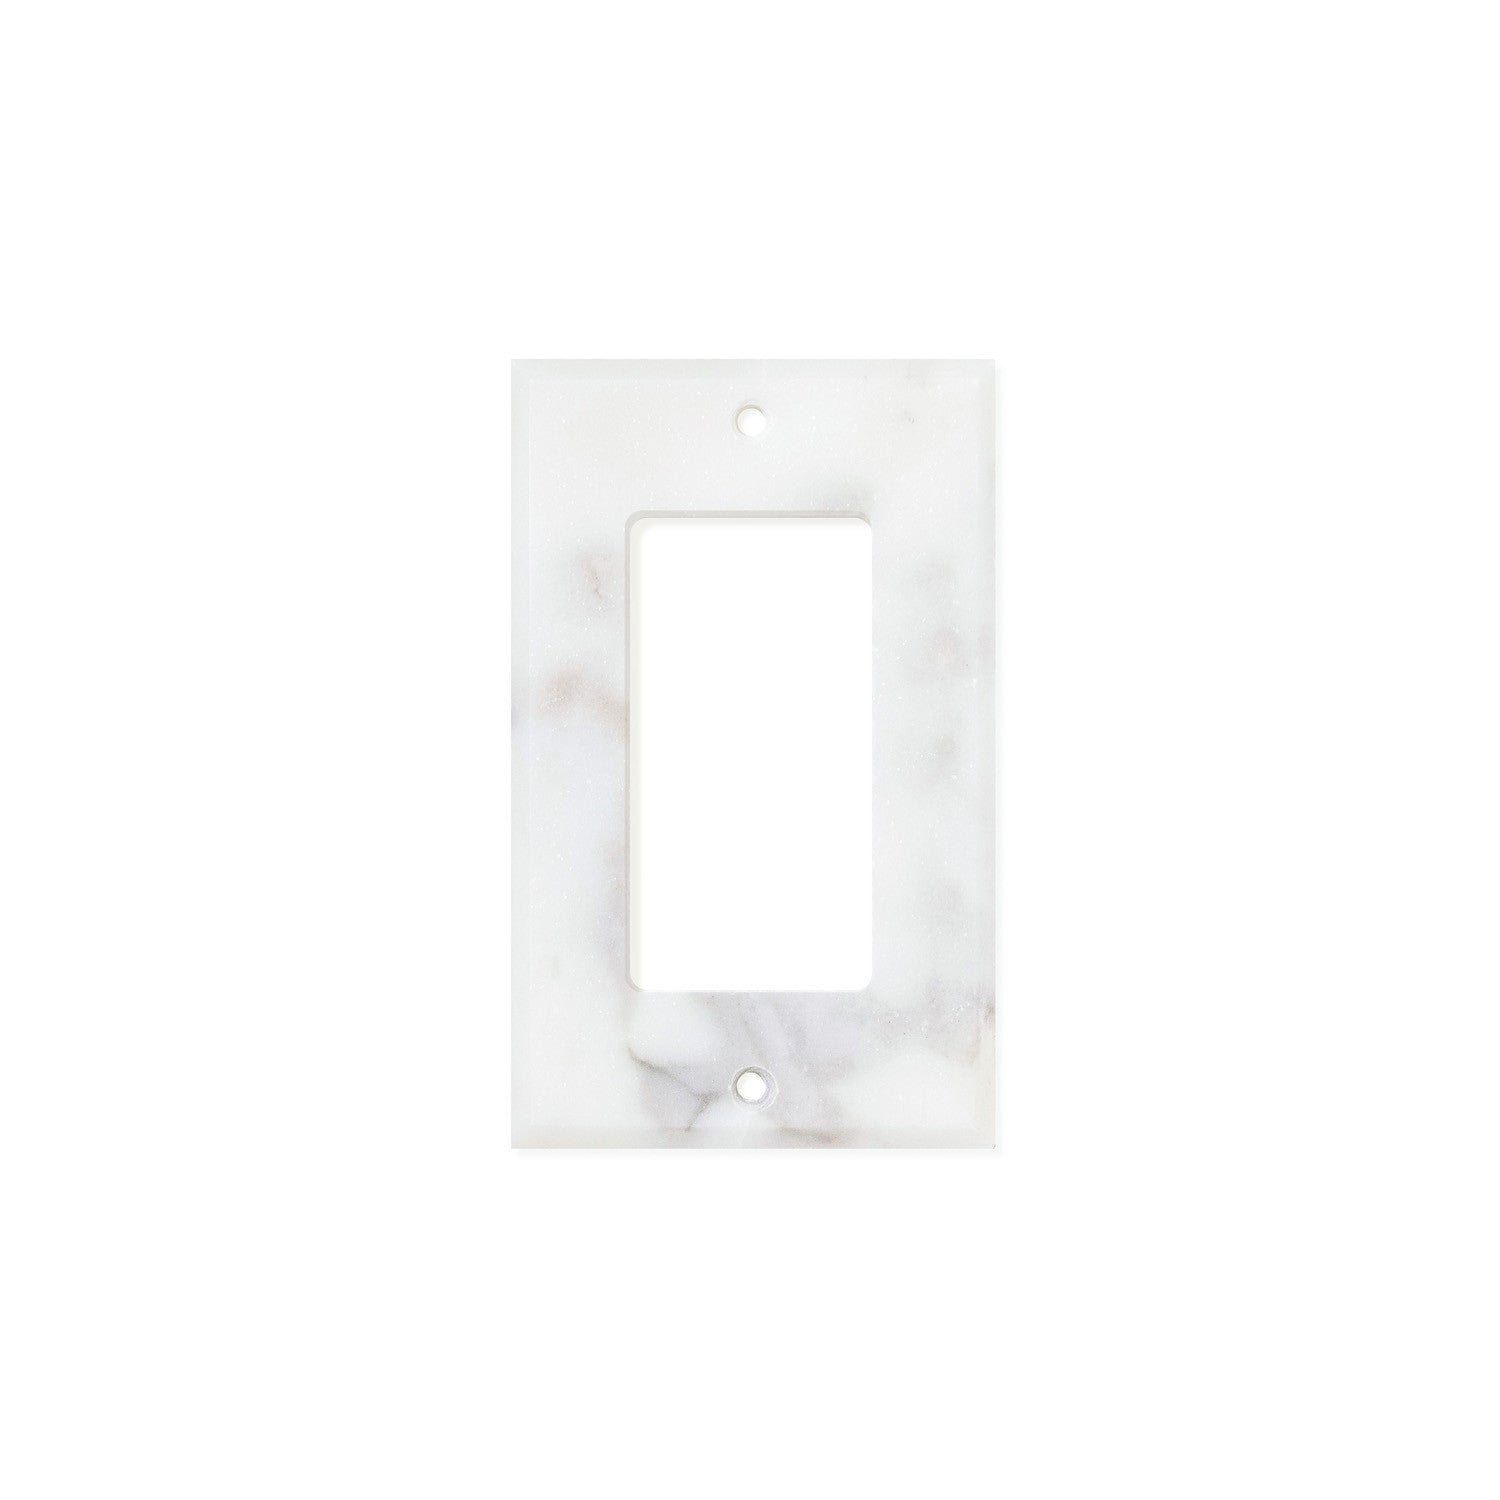 Calacatta Gold Marble Switch Plate Cover, Polished (SINGLE ROCKER) - Tilephile